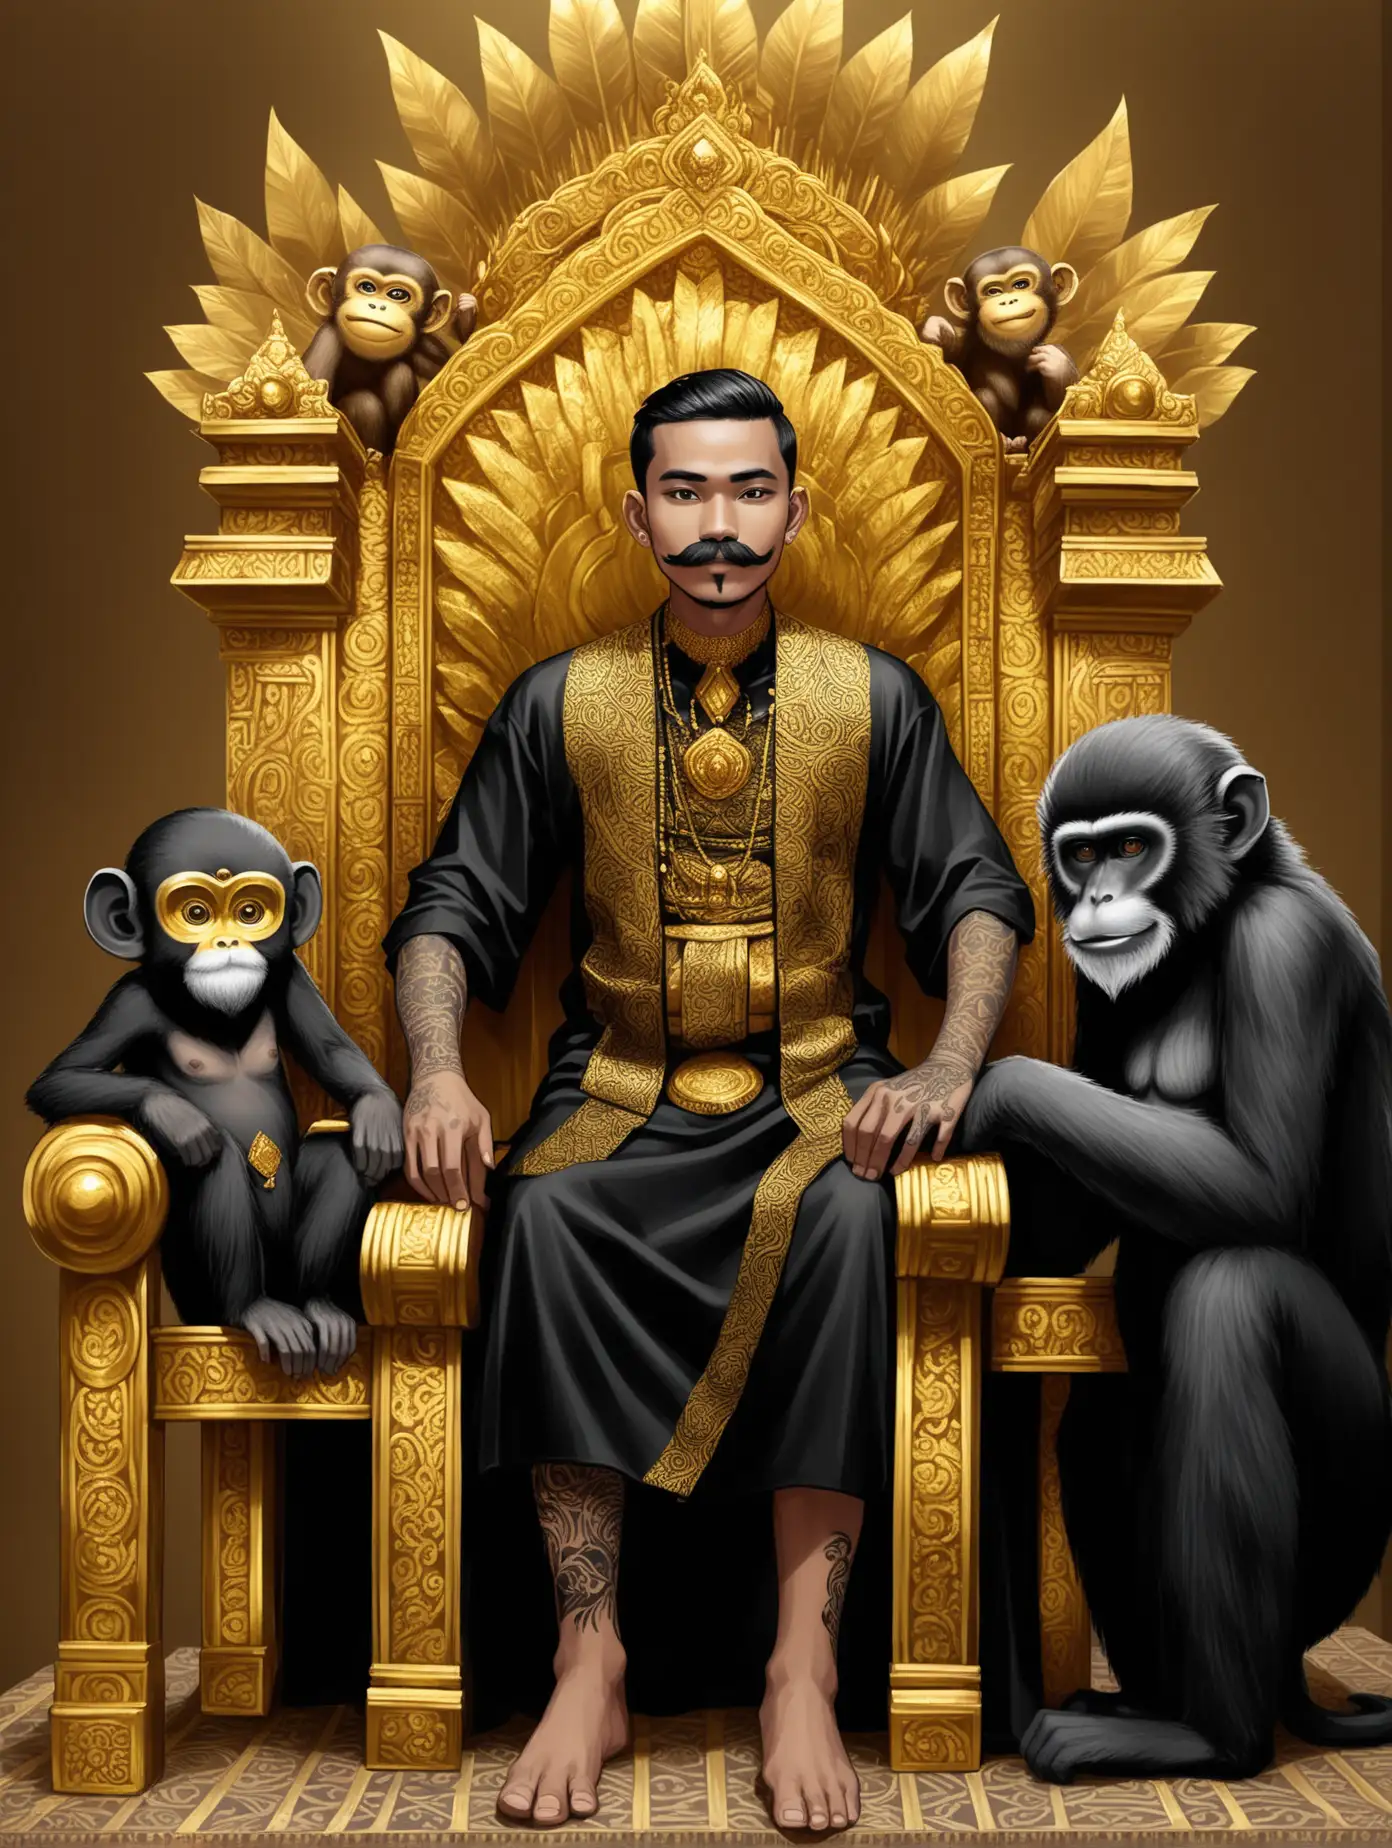 a 25 year old Indonesian man, thick mustache and tattooed all over, sitting on a golden throne wearing black cloth, ancient Indonesian clothes, with gold jewelry, and a black monkey by his side